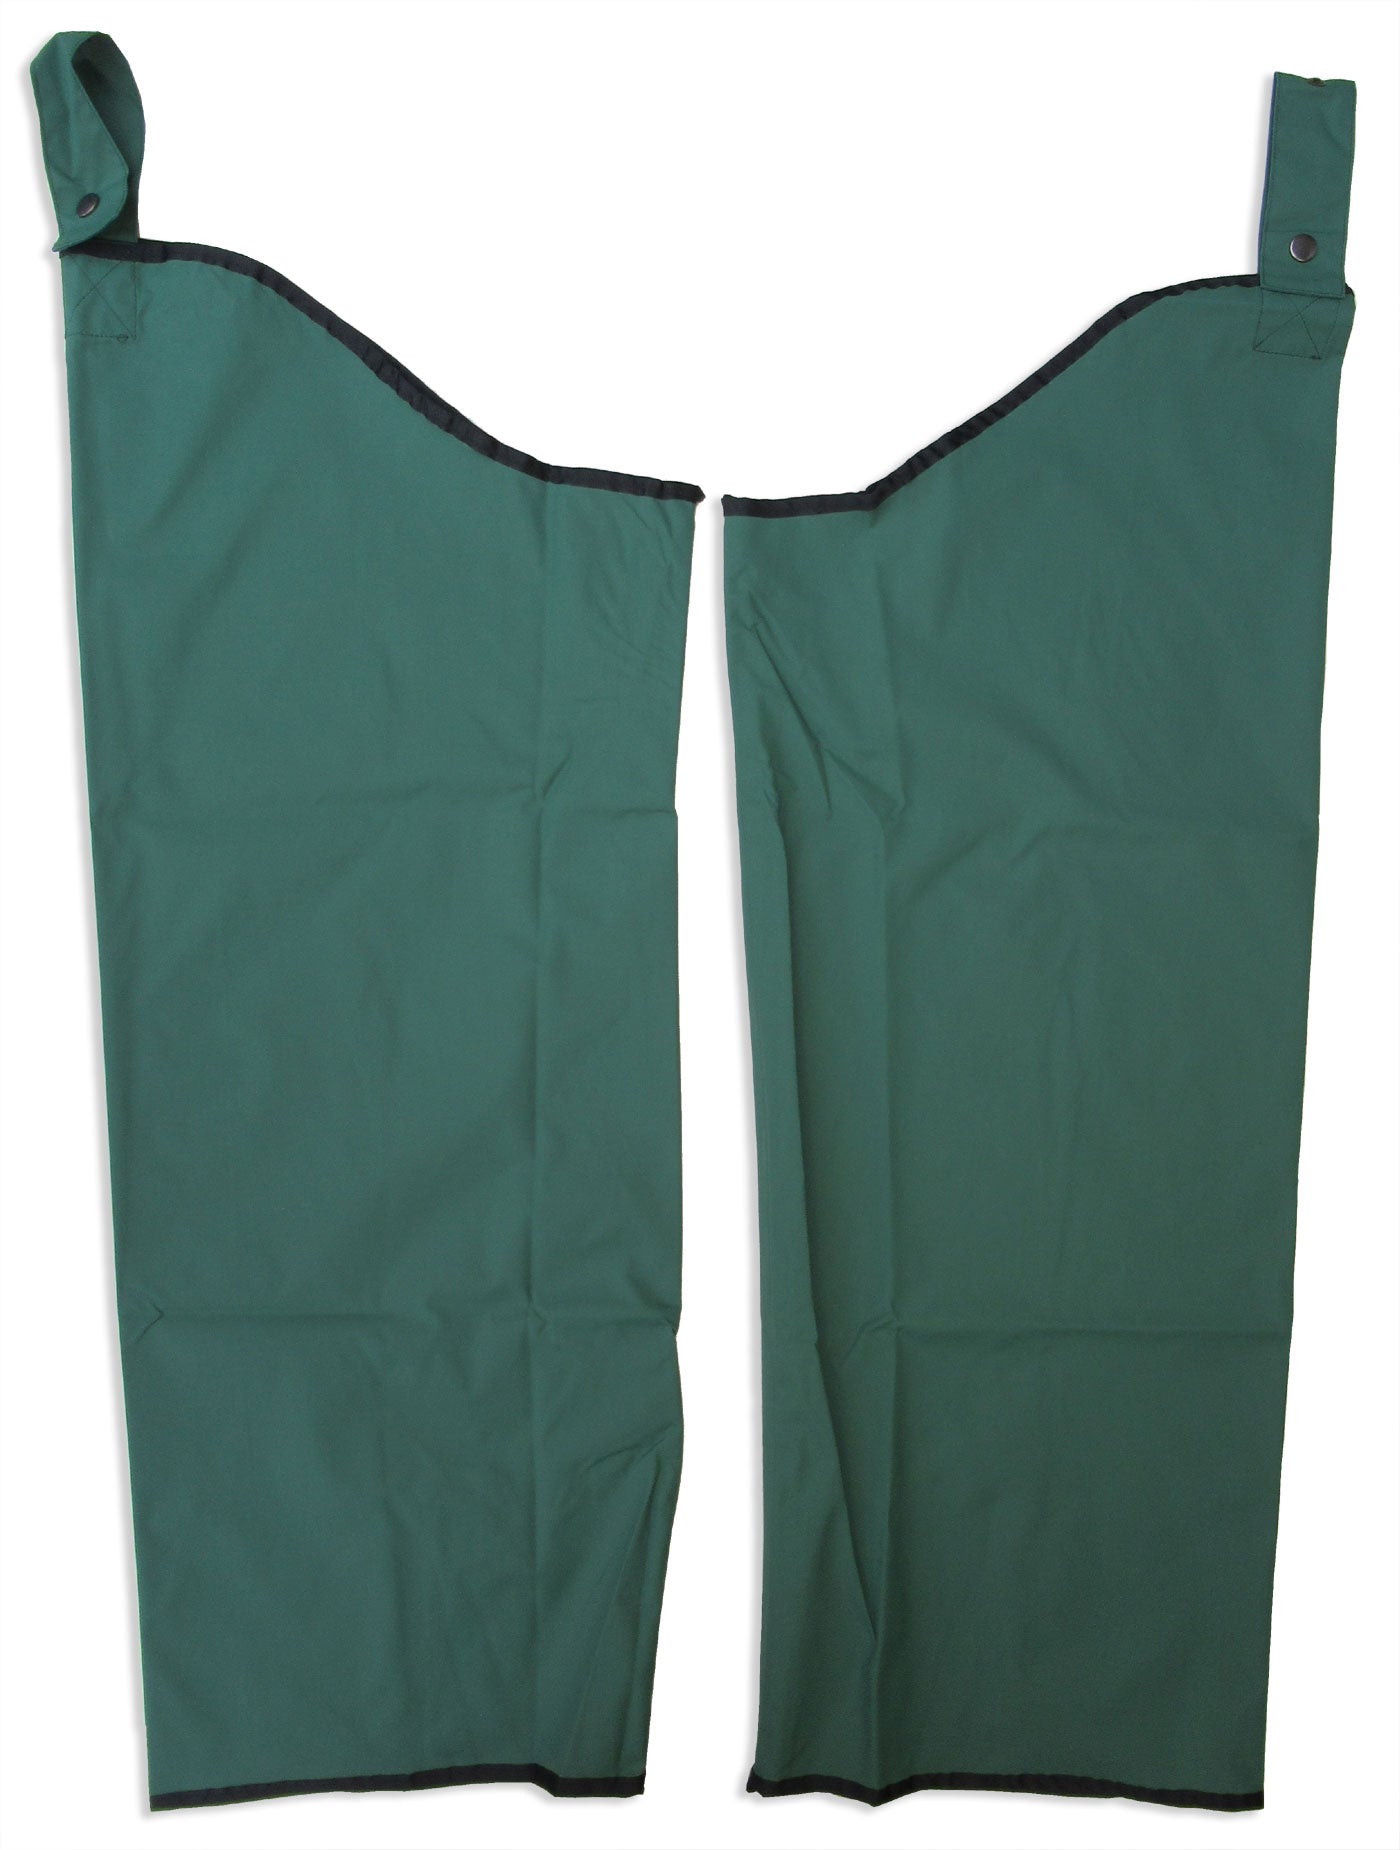 Quality waterproof pull on Leggings from GDT, a Farmer&